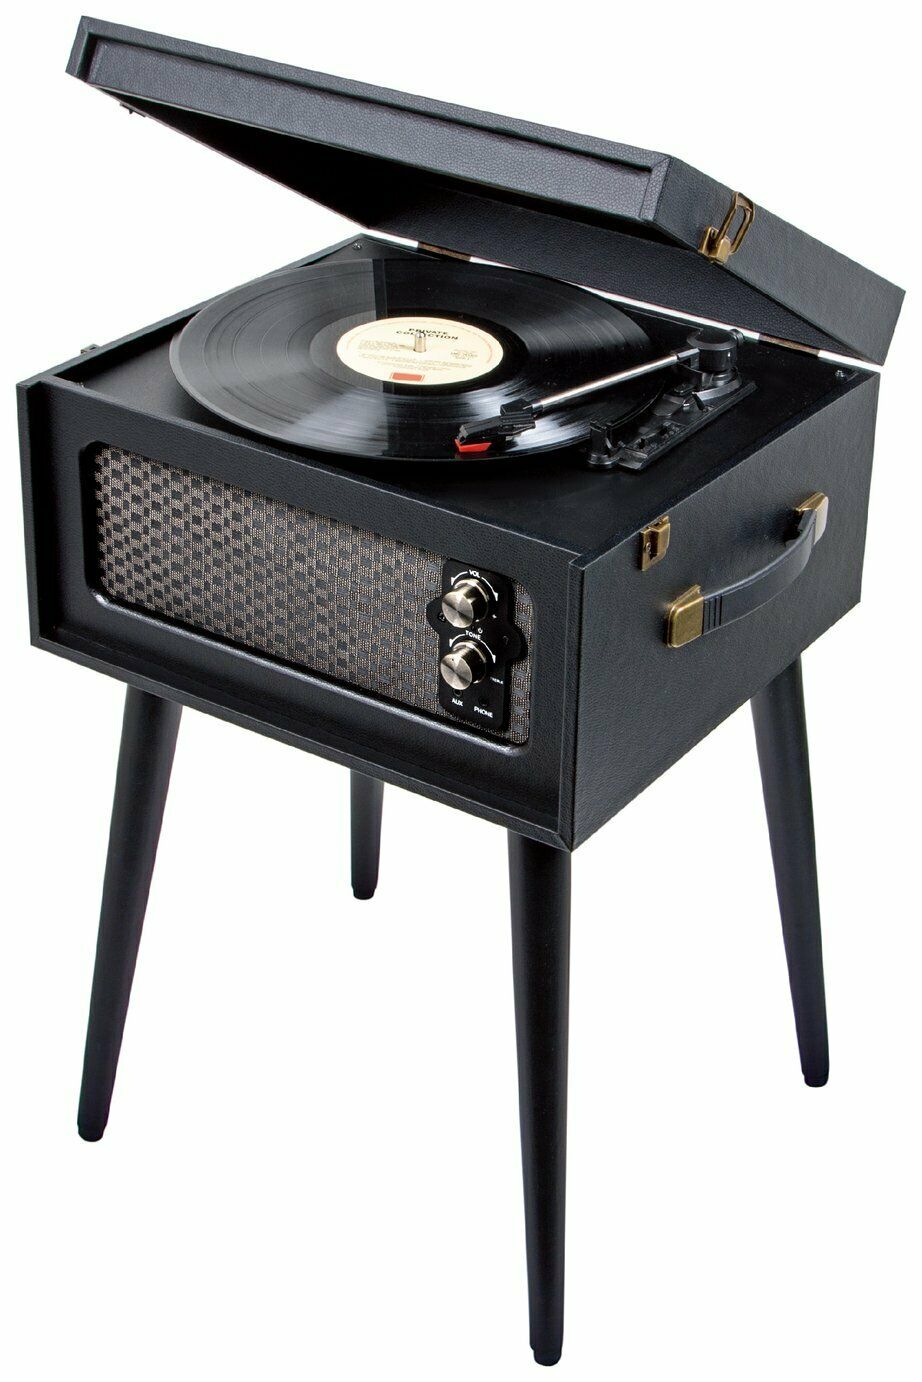 Bush Wooden Turntable with Legs - Black